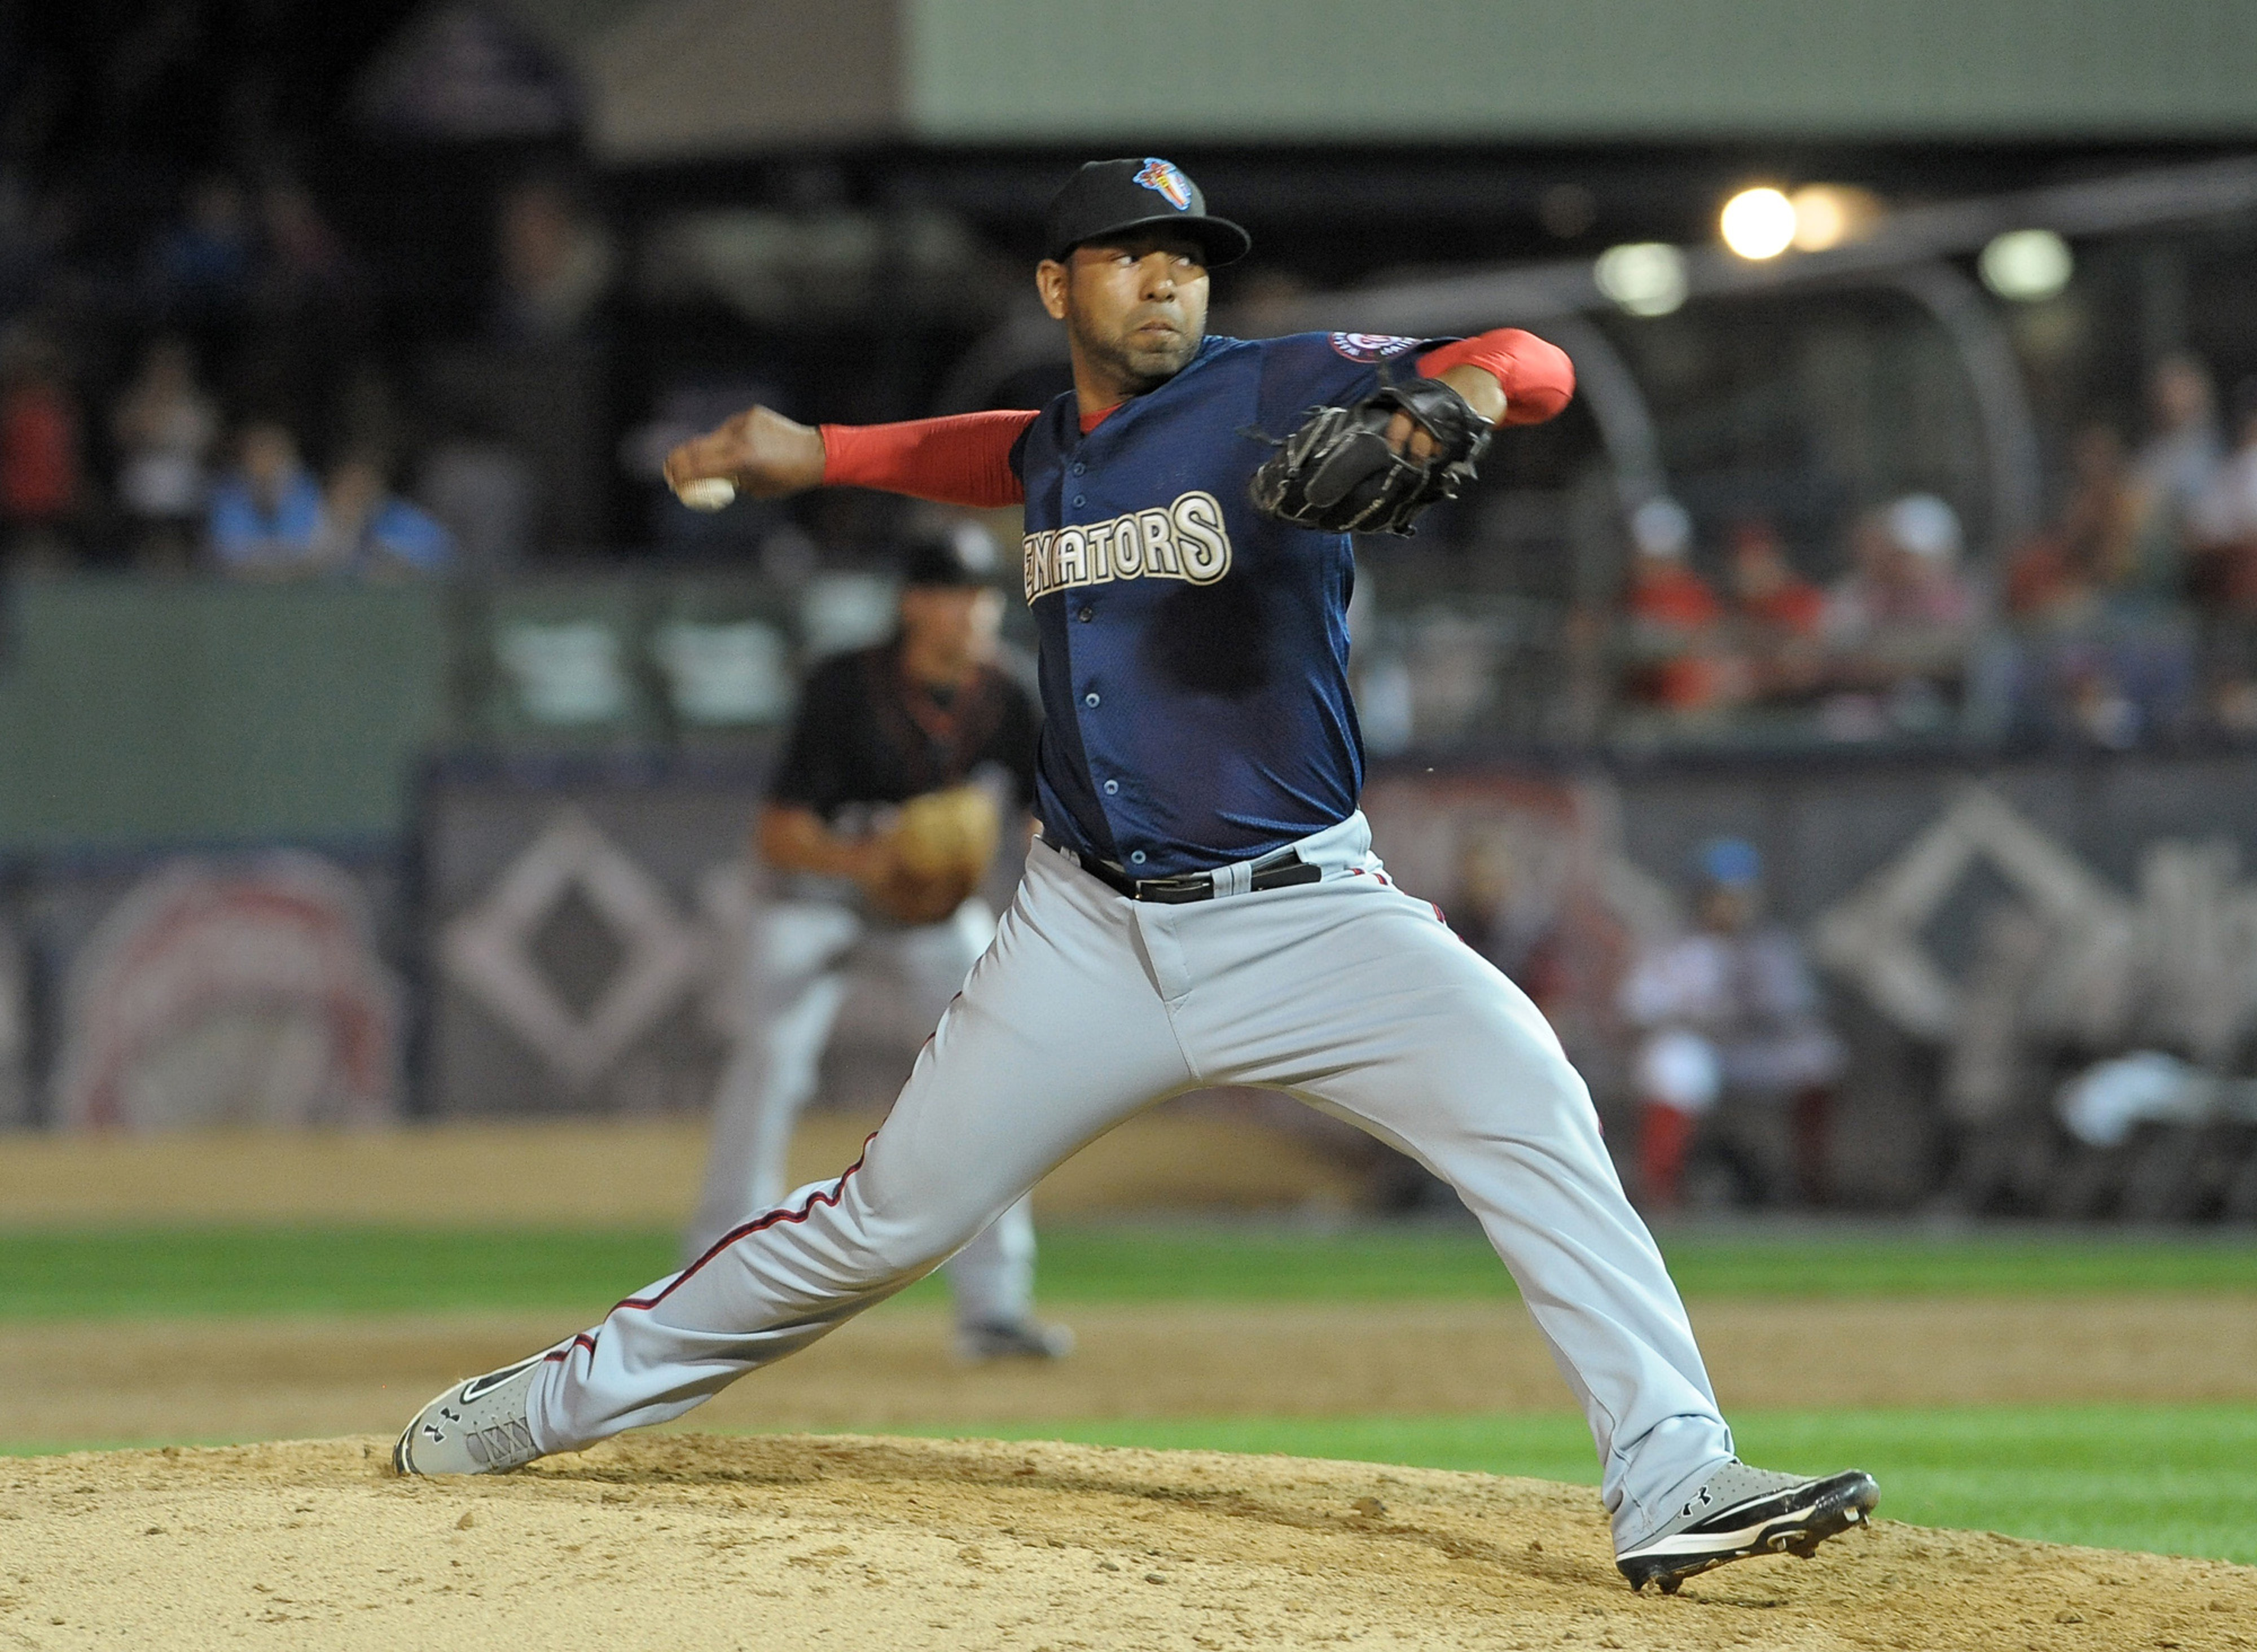 Hector Nelo has a live arm but at times has trouble harnessing his fastball